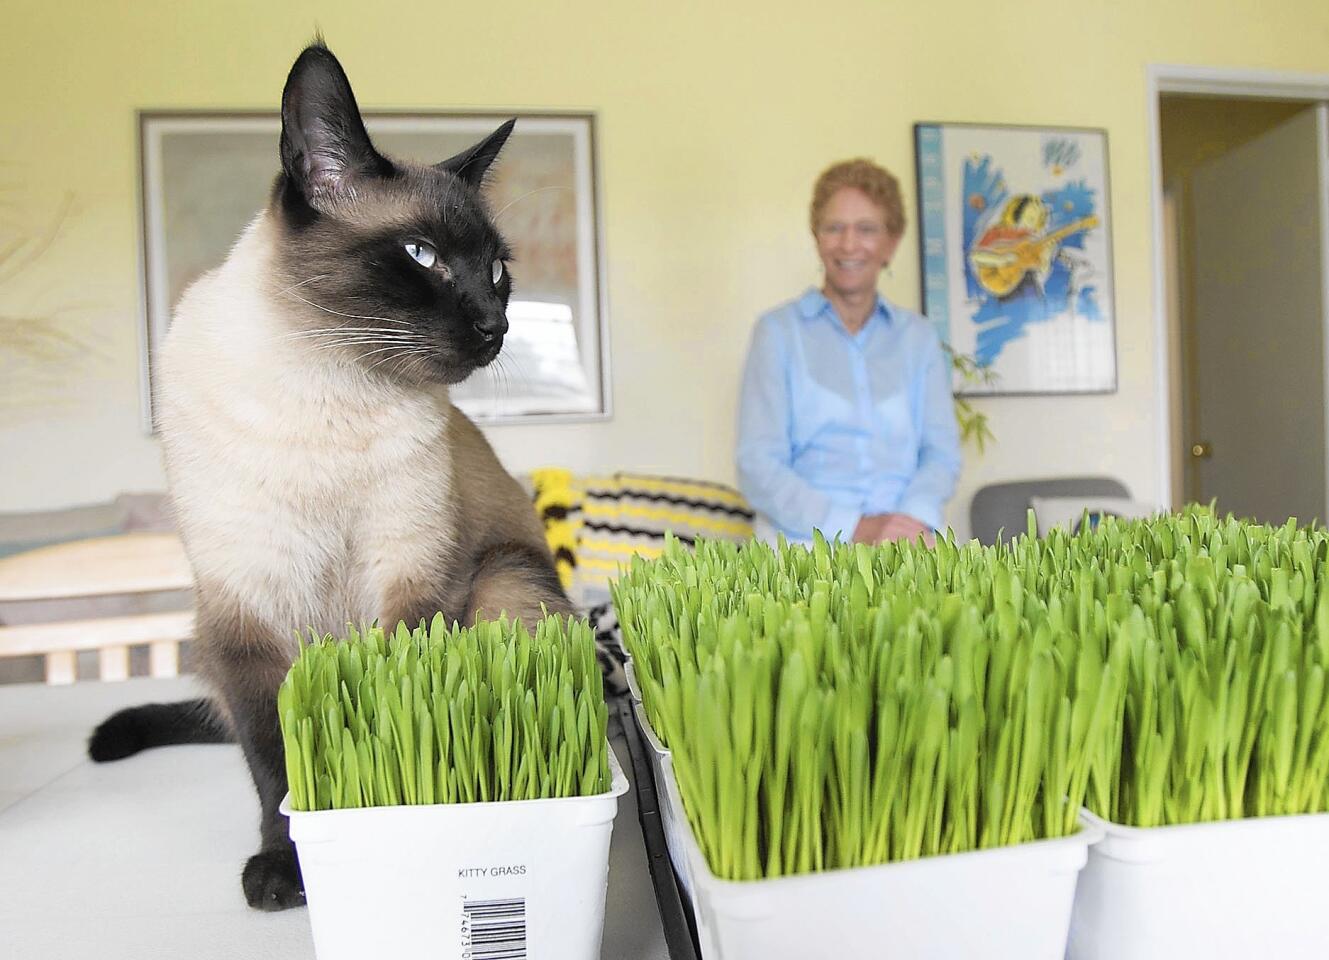 Costa Mesa resident Priscilla Riggs looks on as shop feline mascot Cromwell, the inspiration behind her successful business Priscilla's Pet Grass, takes a look around. Riggs created the organic formula to help in animal digestion and overall health.